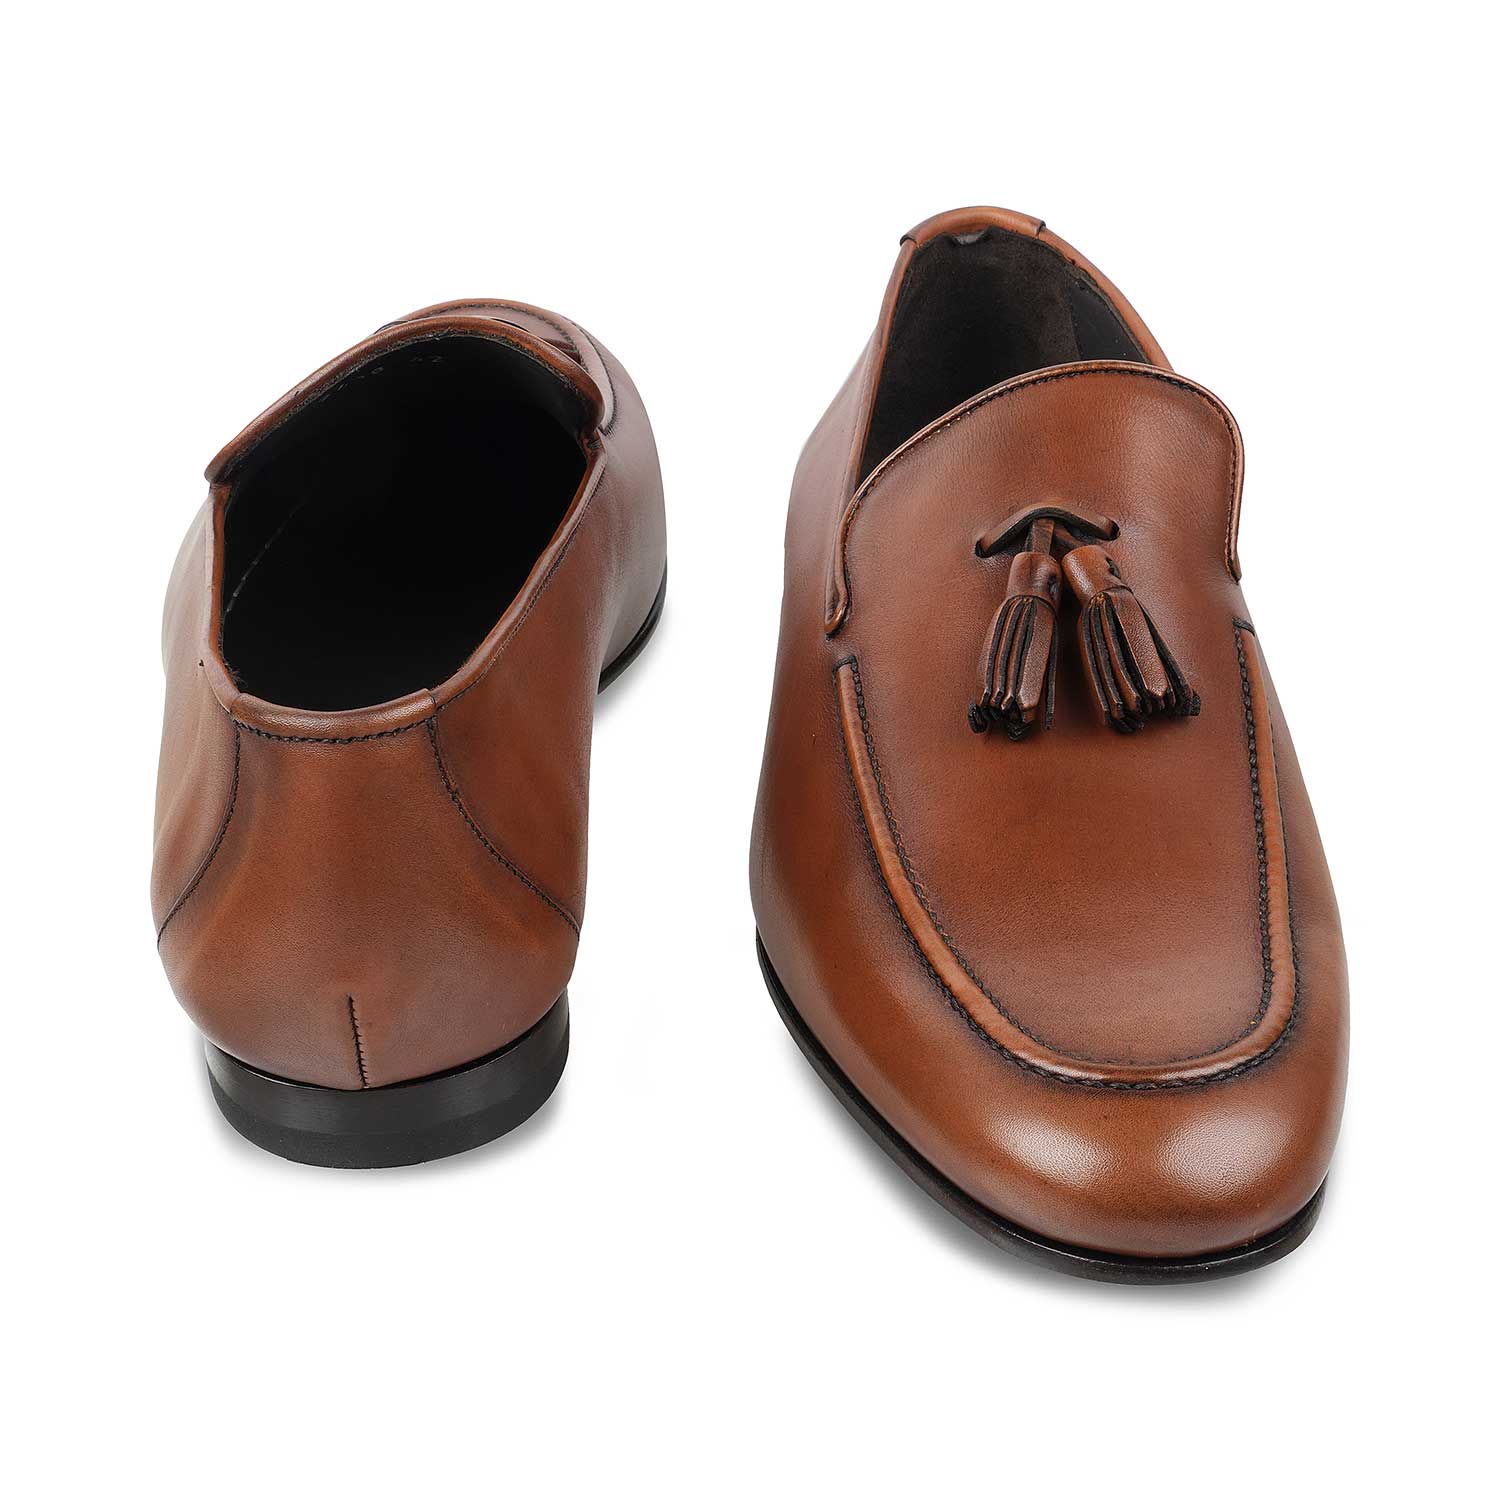 The Mancio Tan Men's Handcrafted Leather Loafers Tresmode - Tresmode